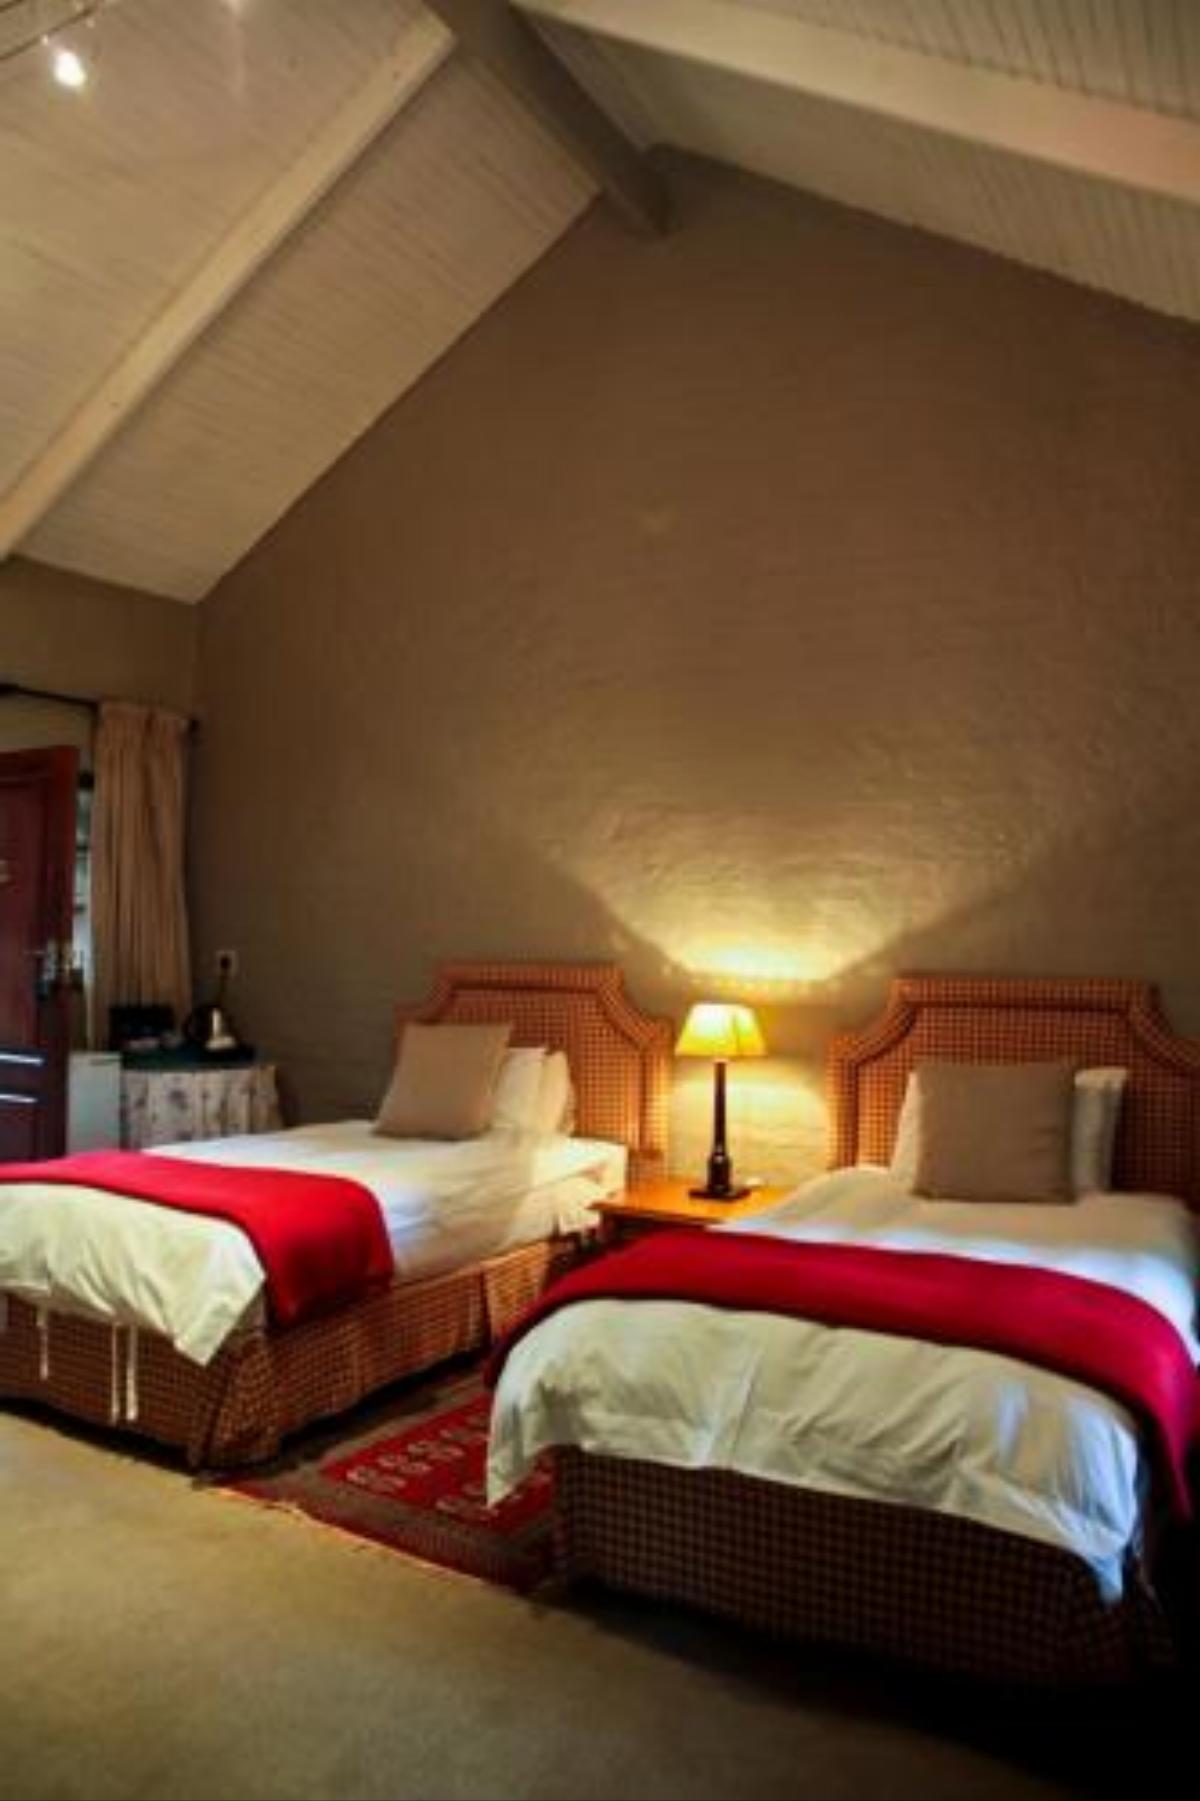 Critchley Hackle Lodge Hotel Dullstroom South Africa